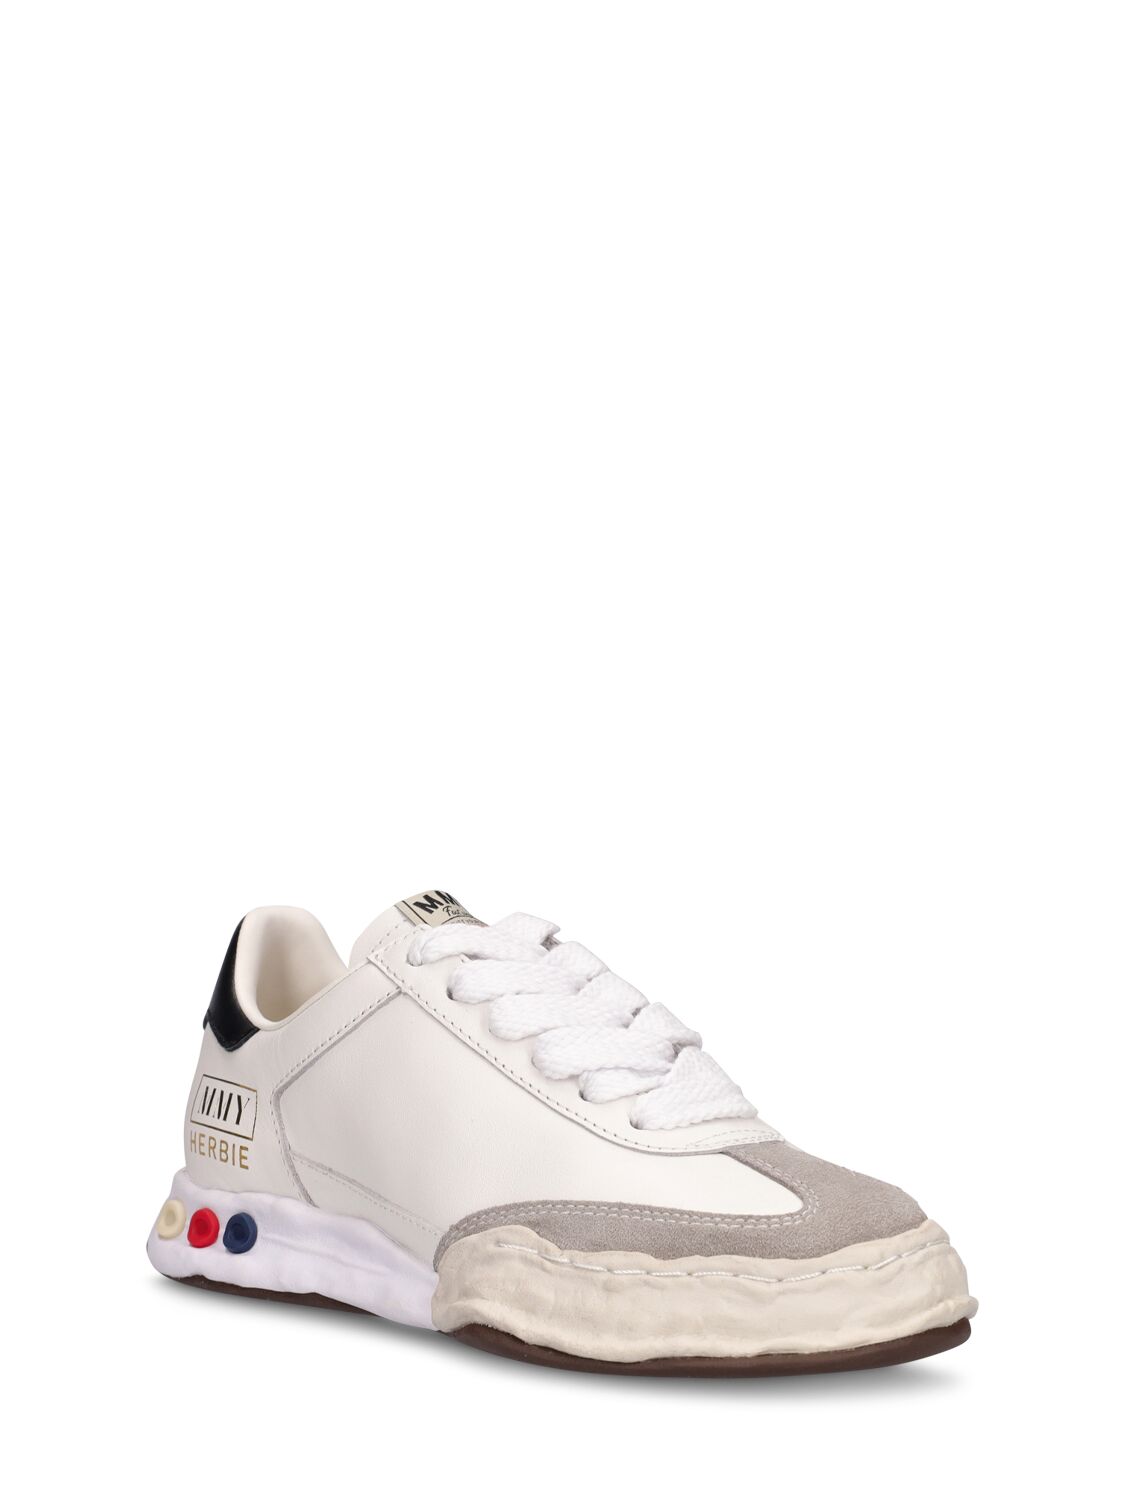 Shop Miharayasuhiro Herbie Low Og Sole Canvas Sneakers In White